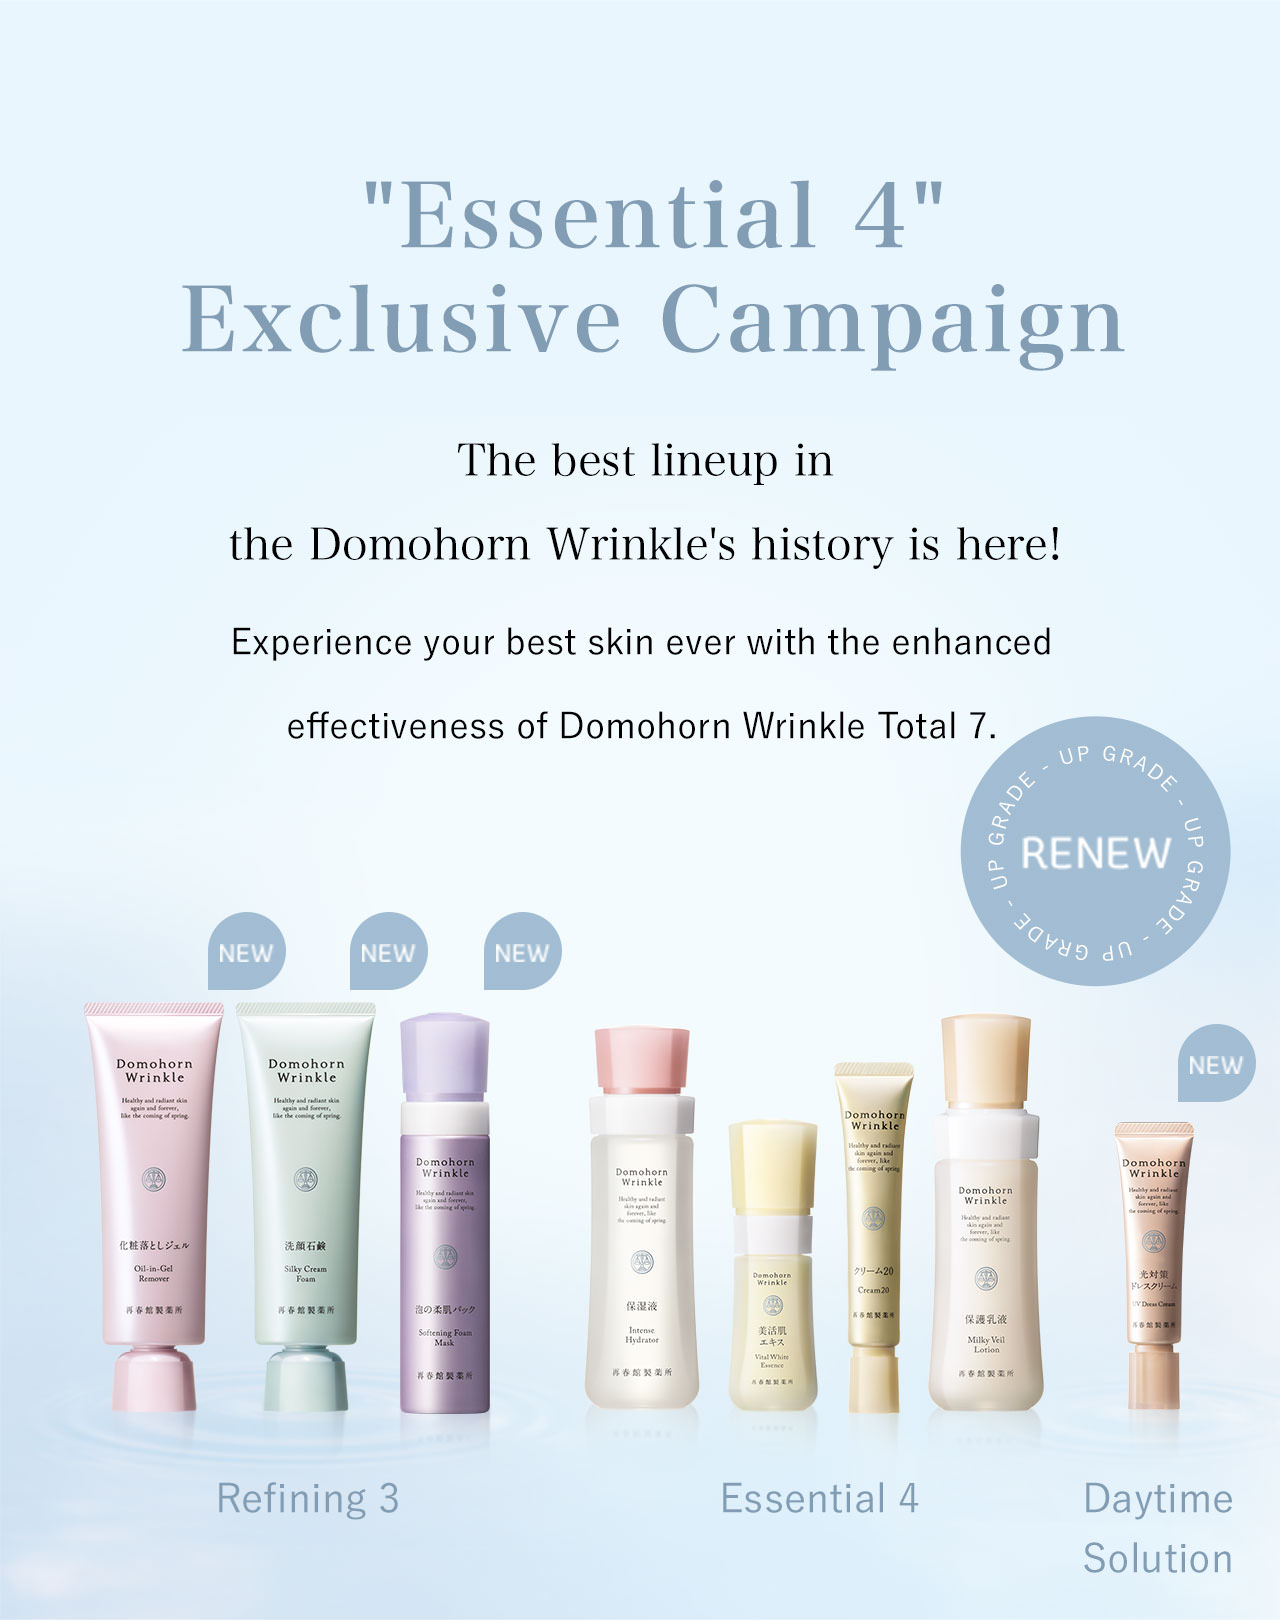 Essential 4 Exclusive Campaign The best lineup in the Domohorn Wrinkle's history is here! Experience your best skin ever with the enhanced effectiveness of Domohorn Wrinkle Total 7.